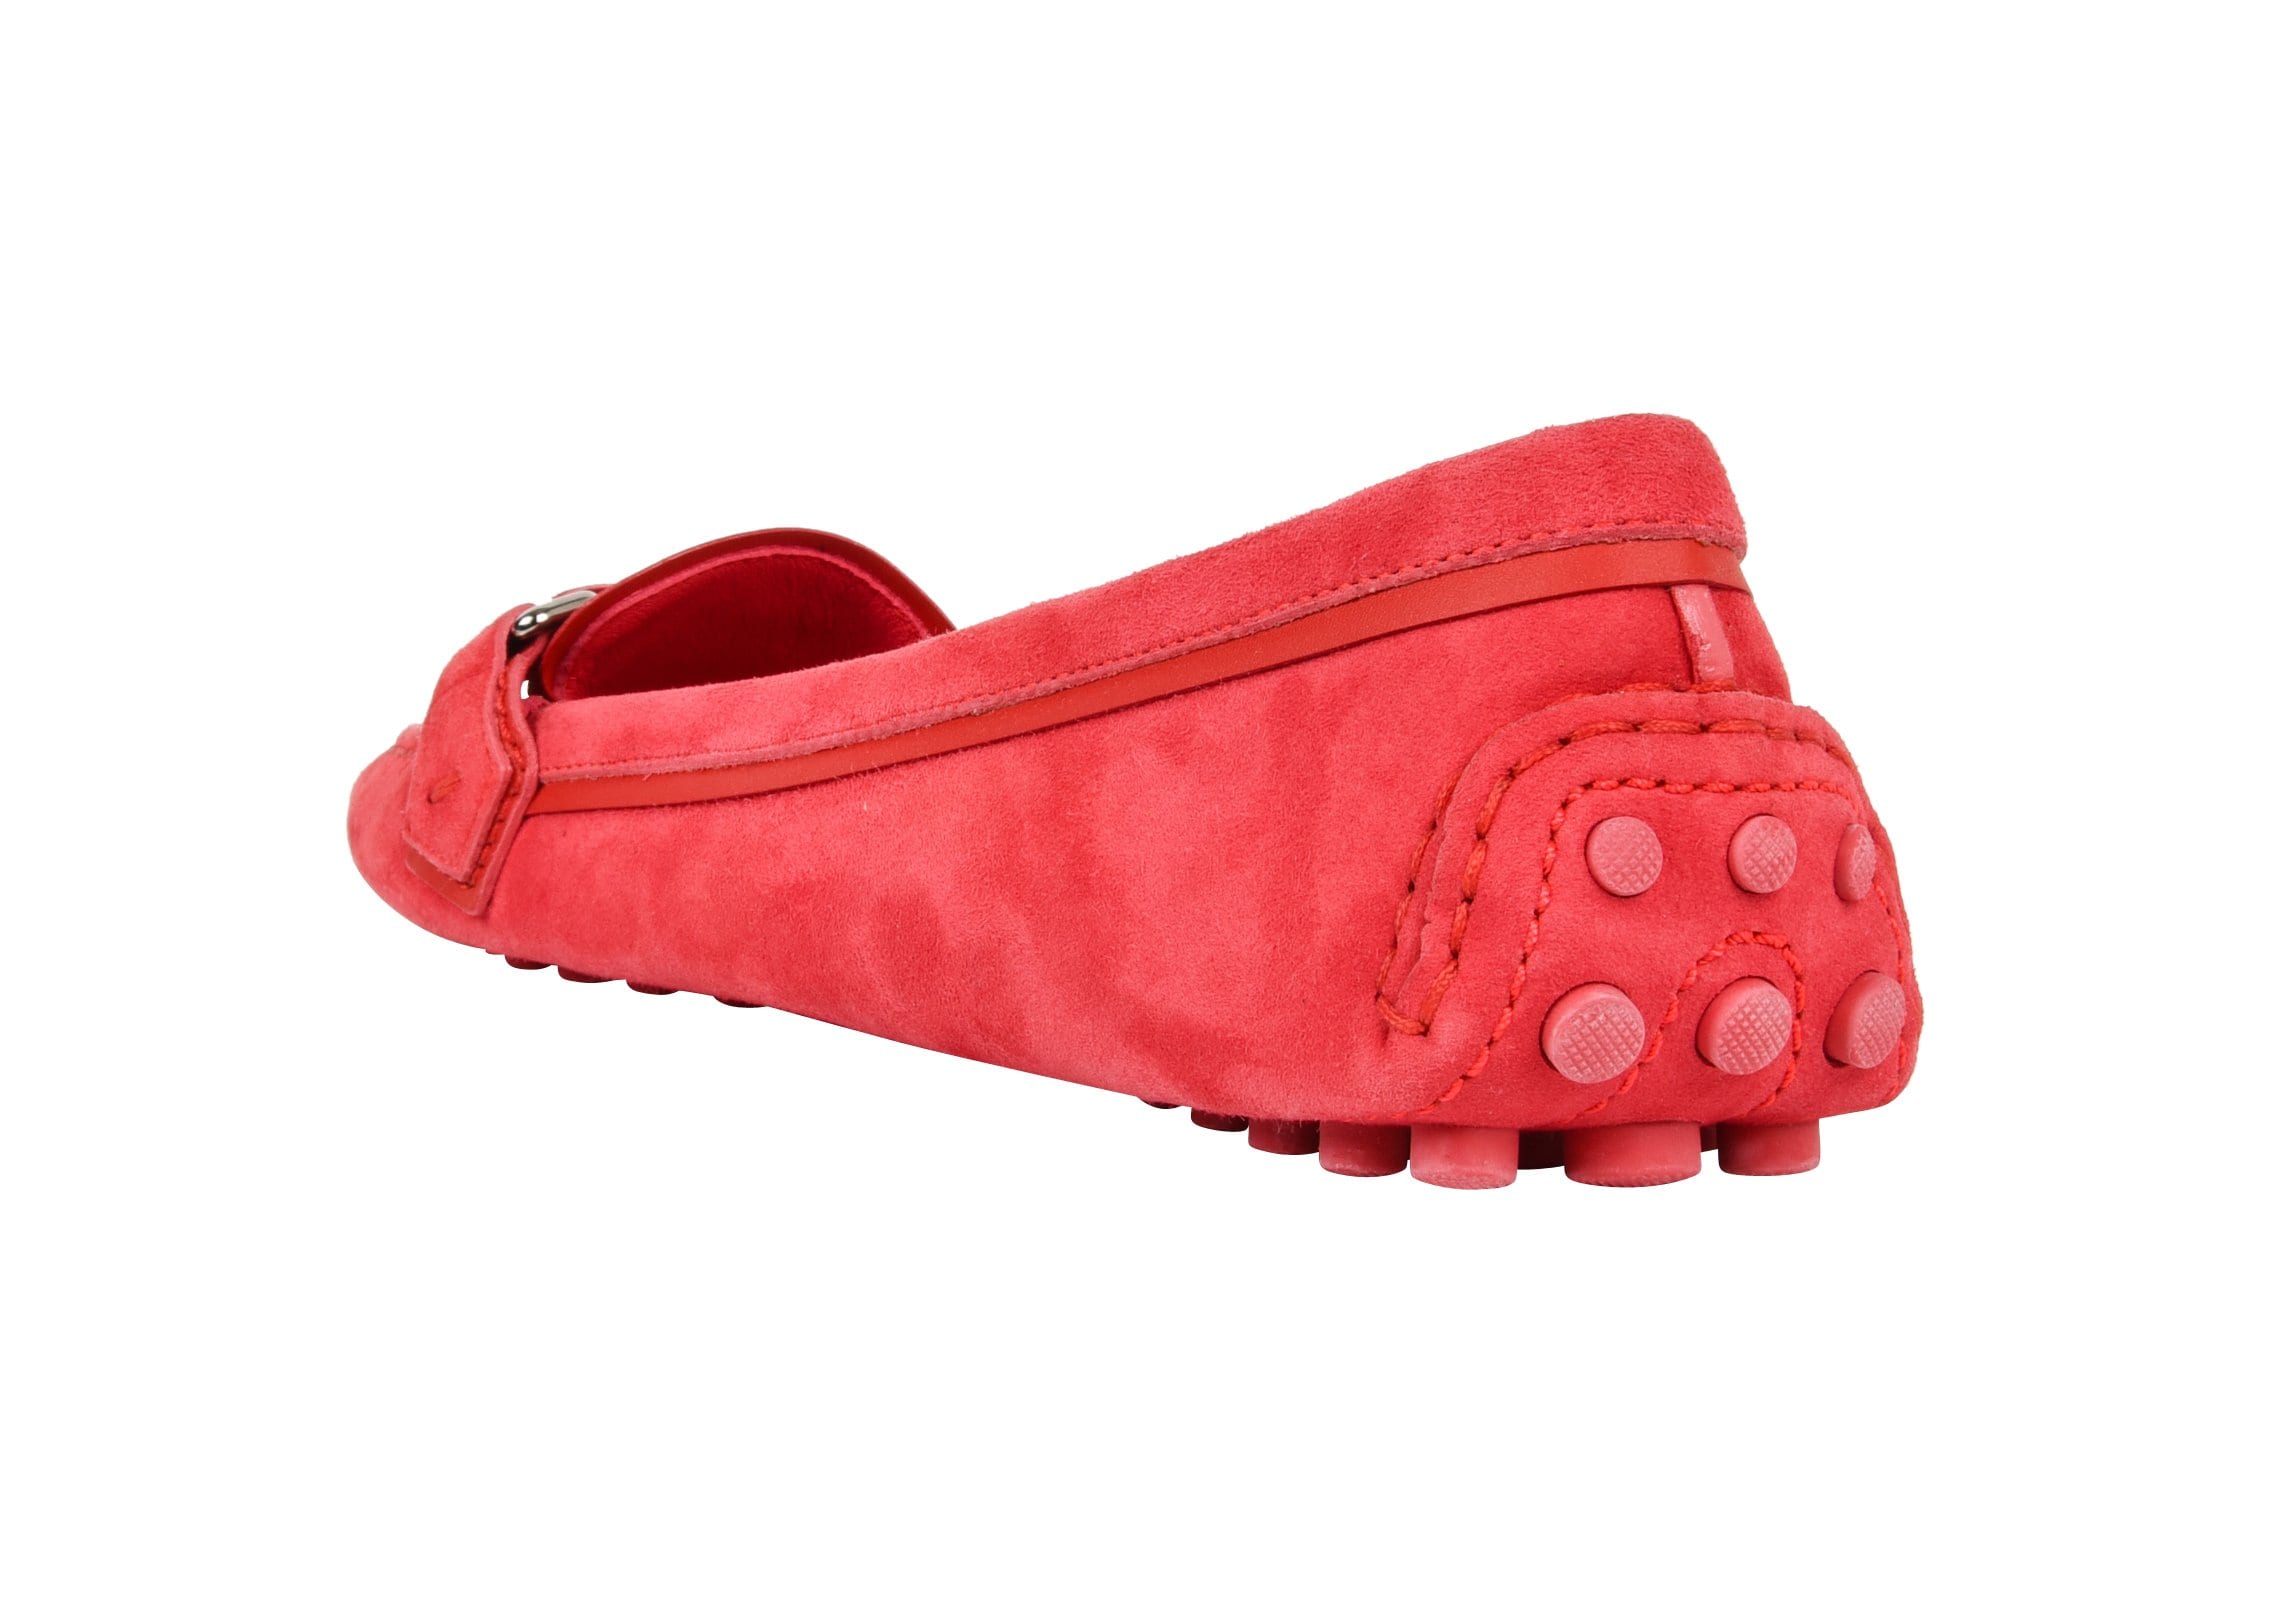 Louis Vuitton Shoe Pink Raspberry Suede Loafer / Driving Shoe 38.5 / 8.5 New - mightychic